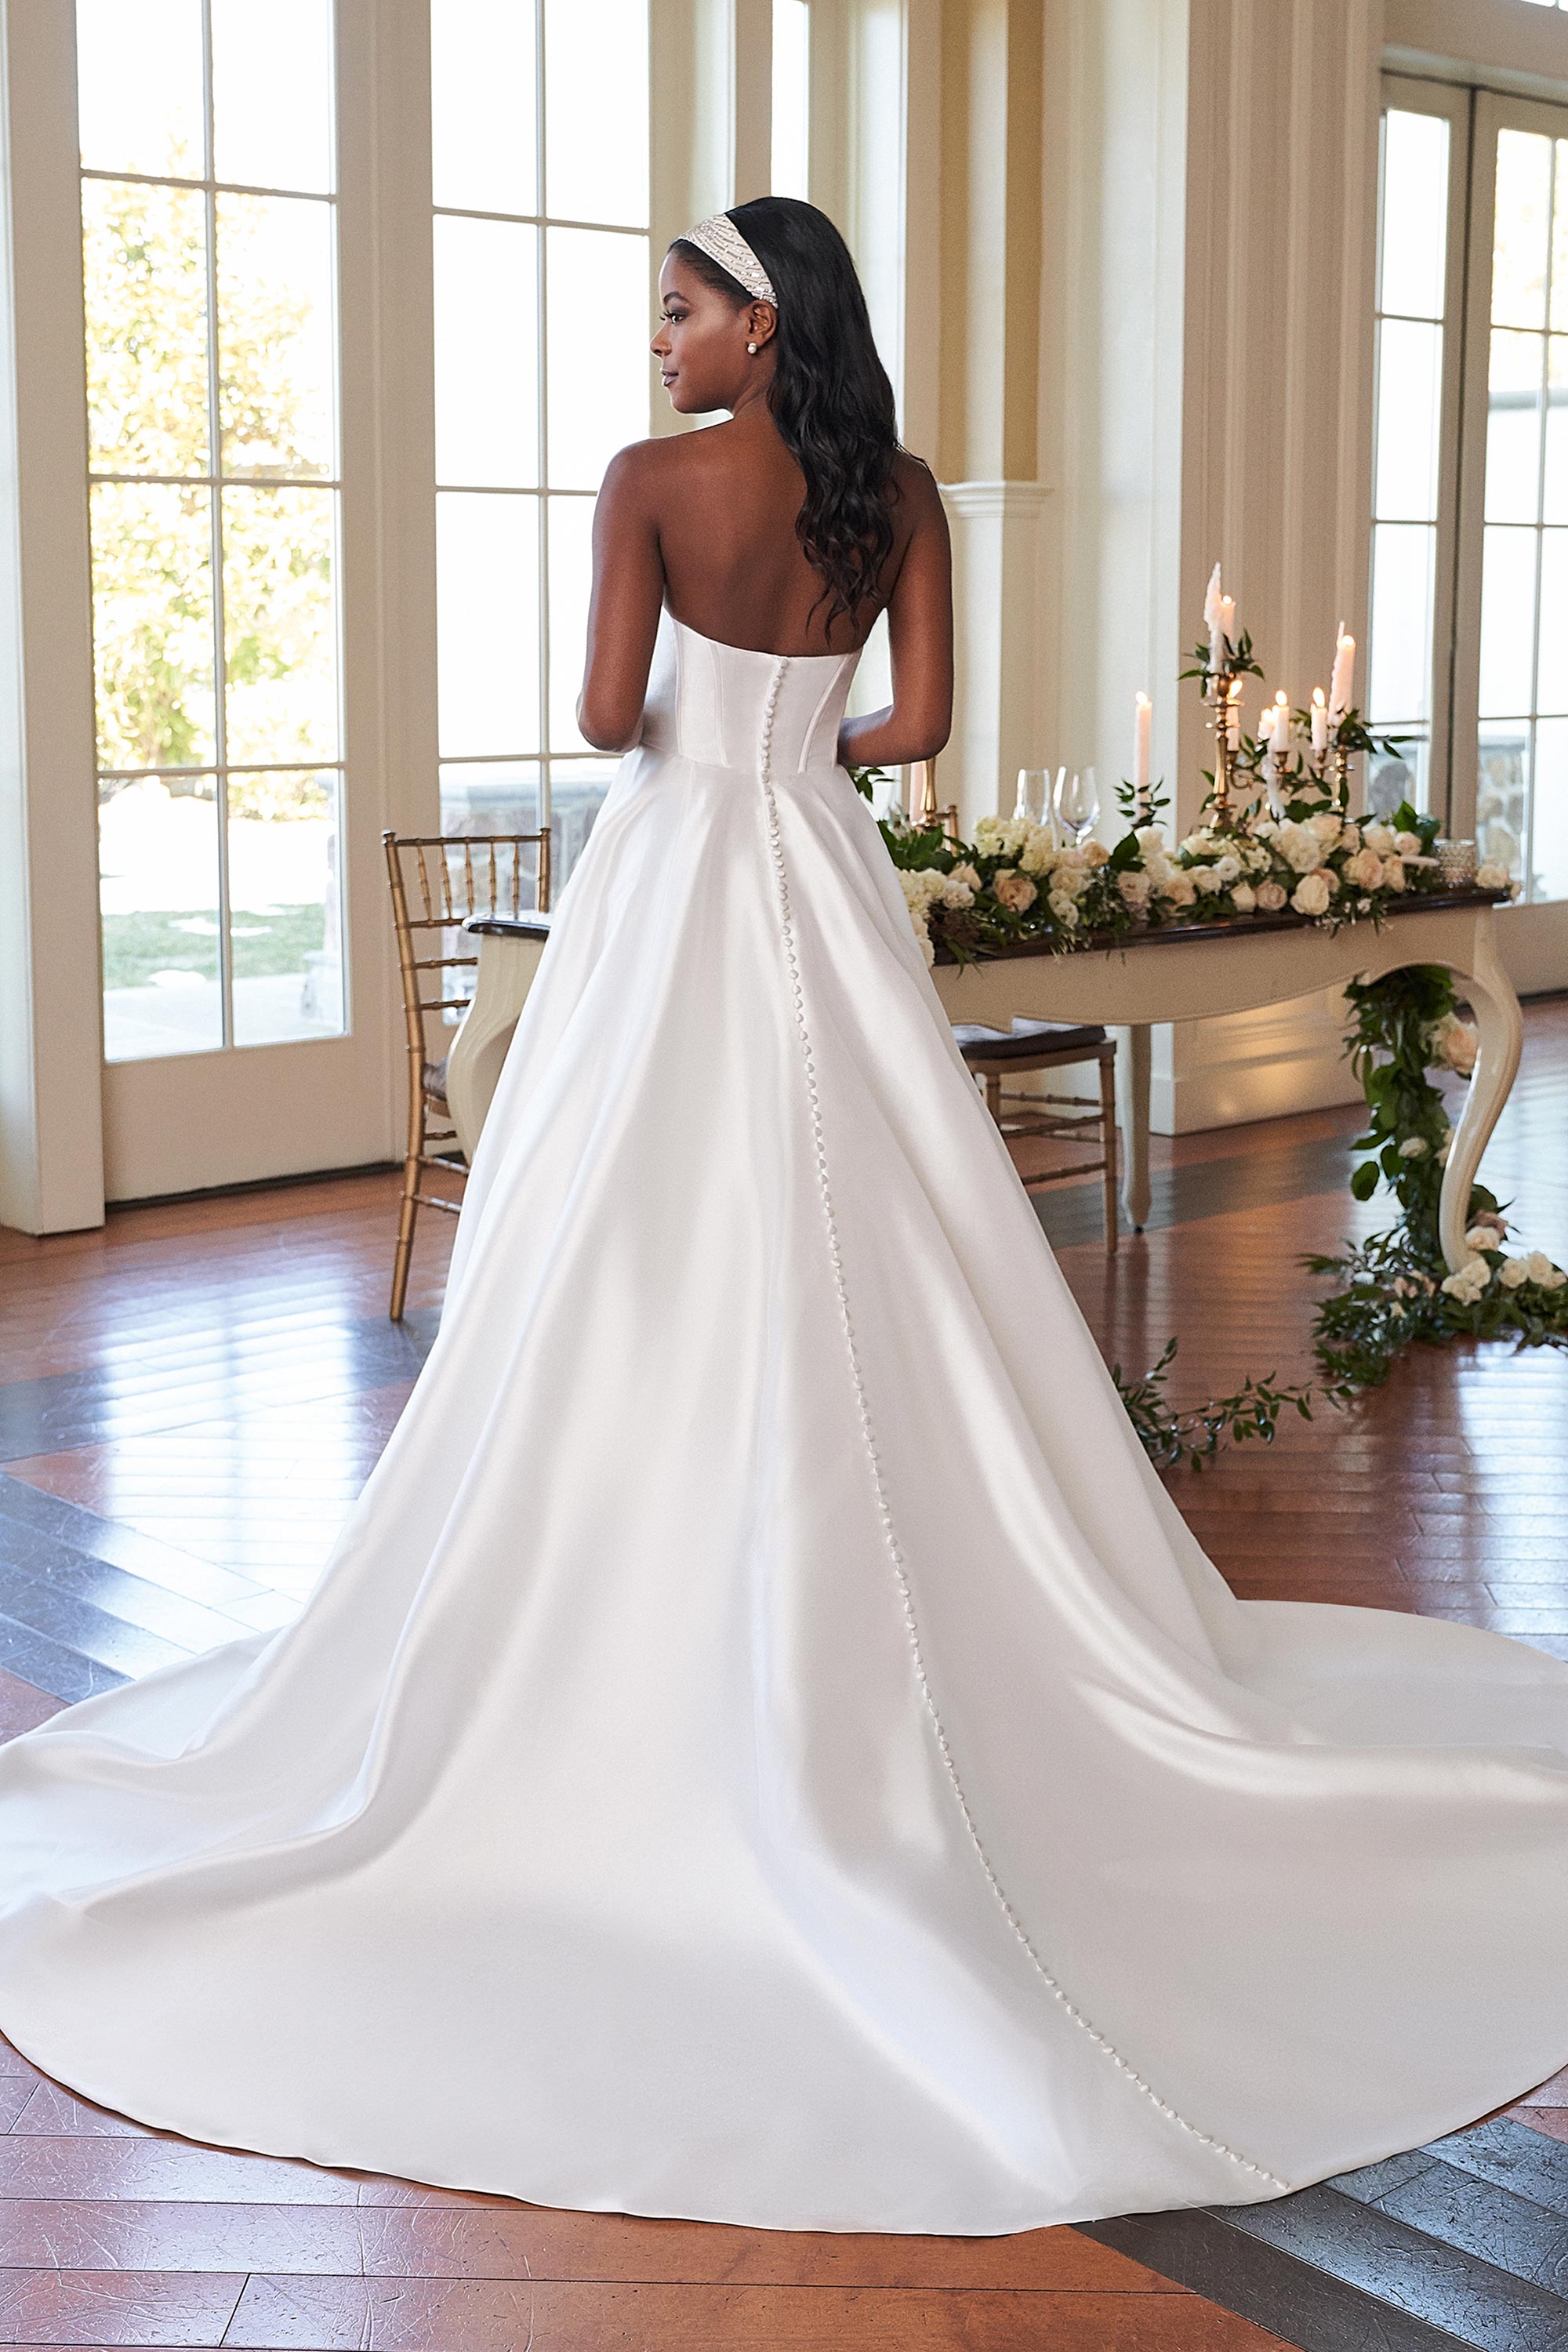 Show Sample: #44292 - Mikado Ball Gown with Smile Neckline